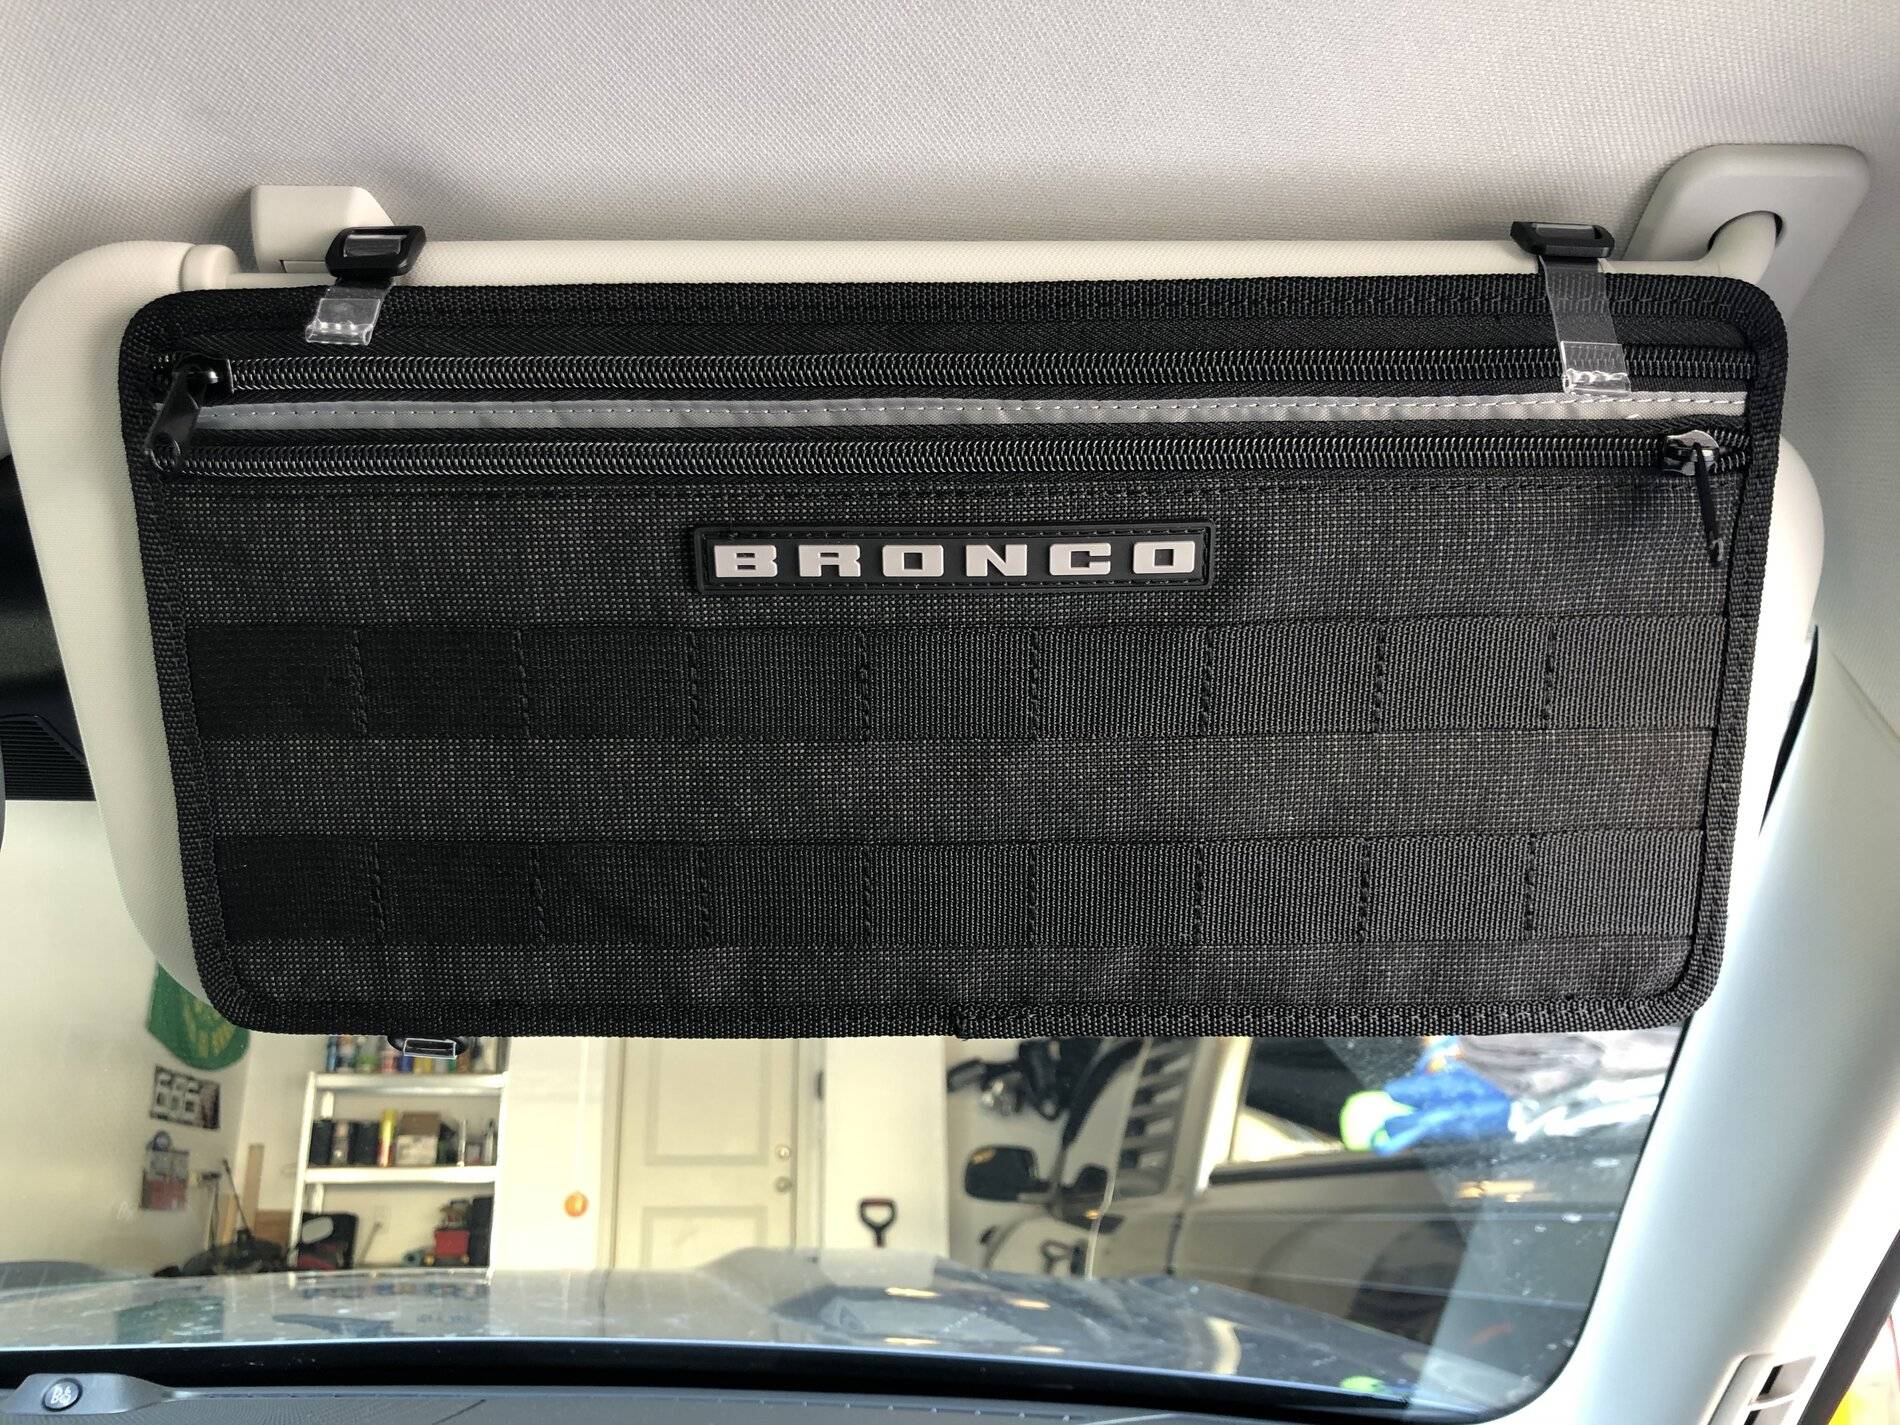 Ford Bronco Sport Closer Look At The Accessories Rear Cargo Organizer, Sunvisor Organizer, Owners Manual, Key Fob Cover, Key Cover IMG_2864.JPG